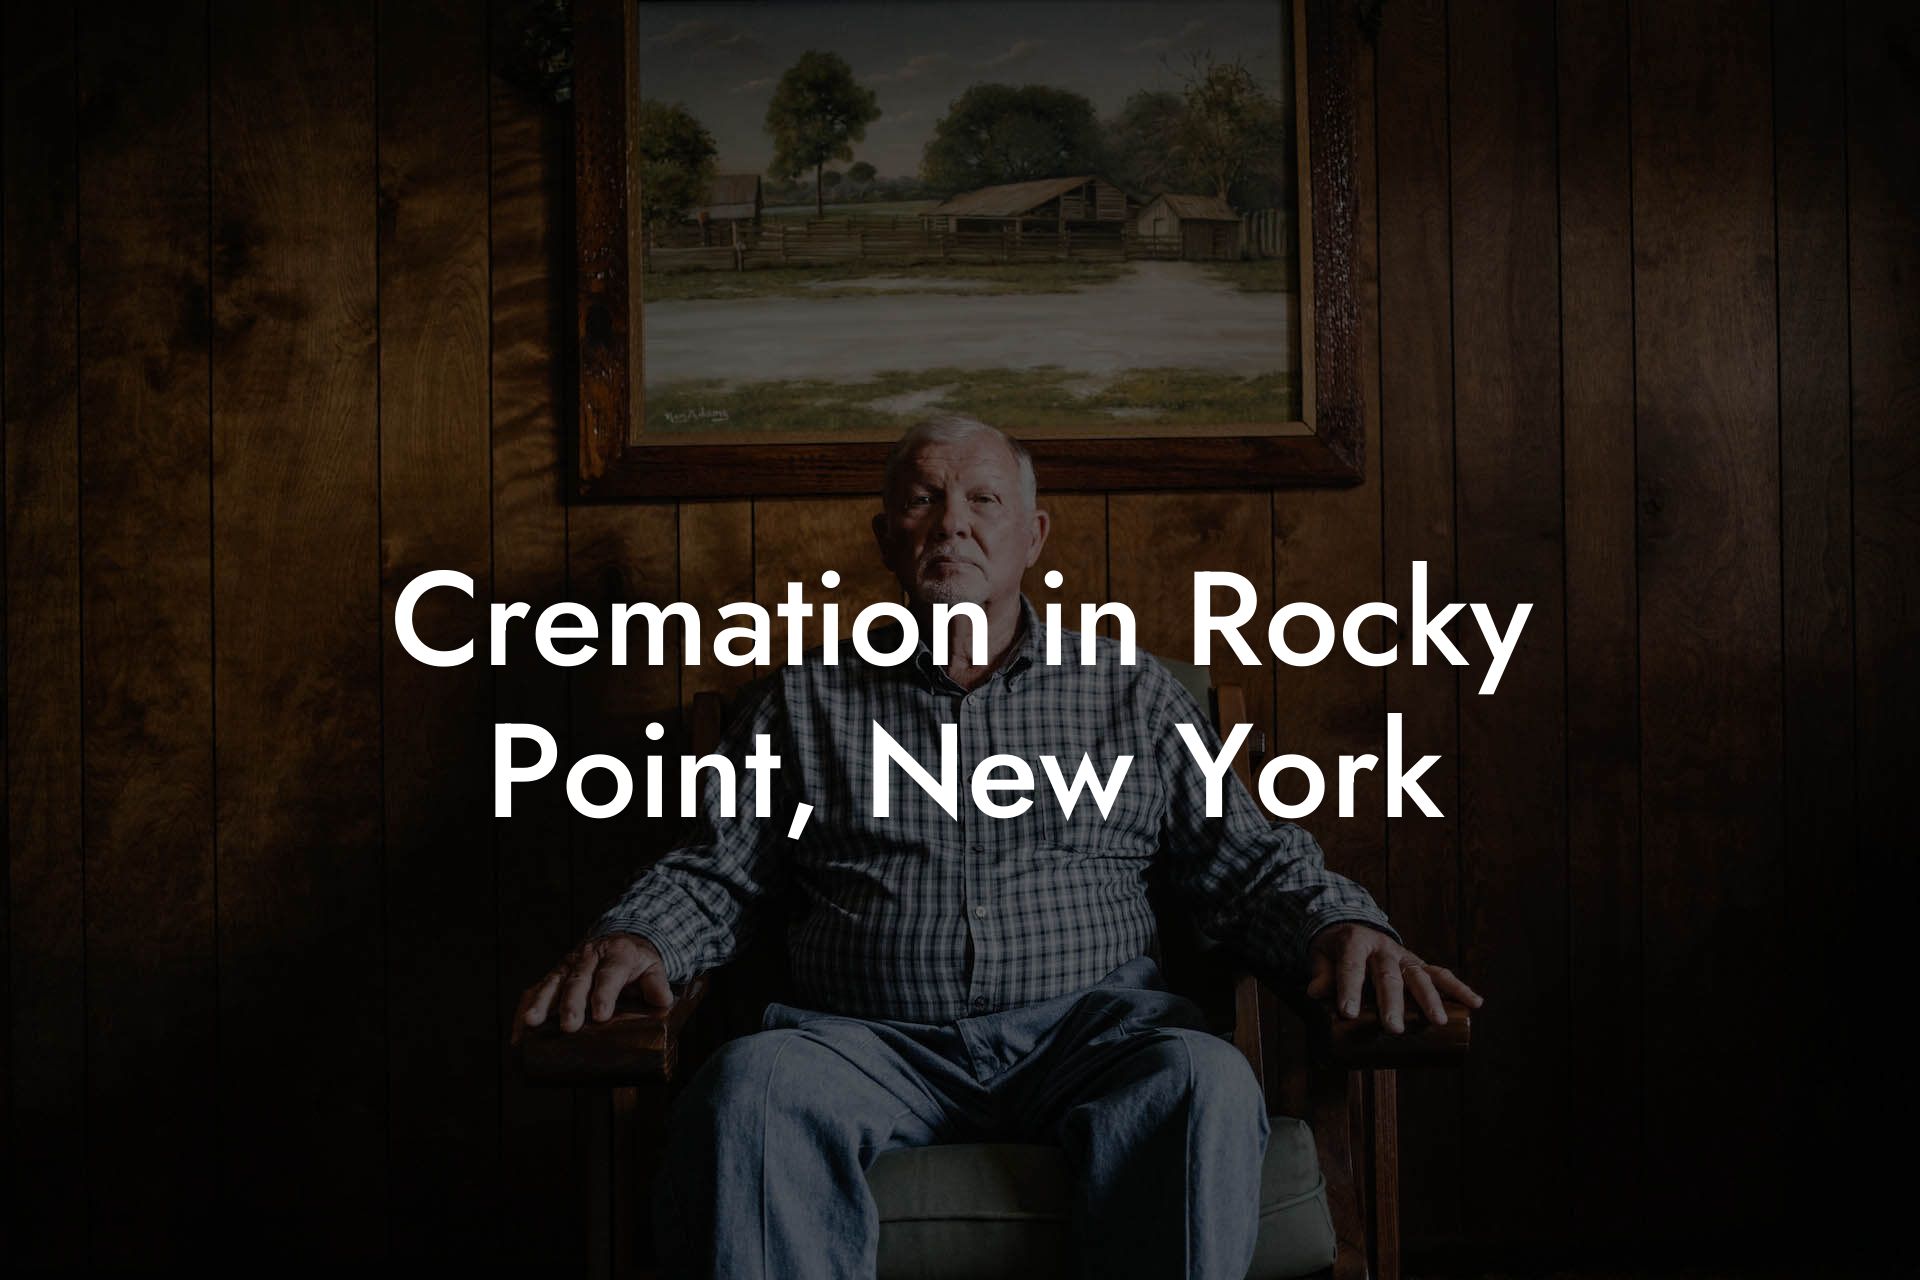 Cremation in Rocky Point, New York